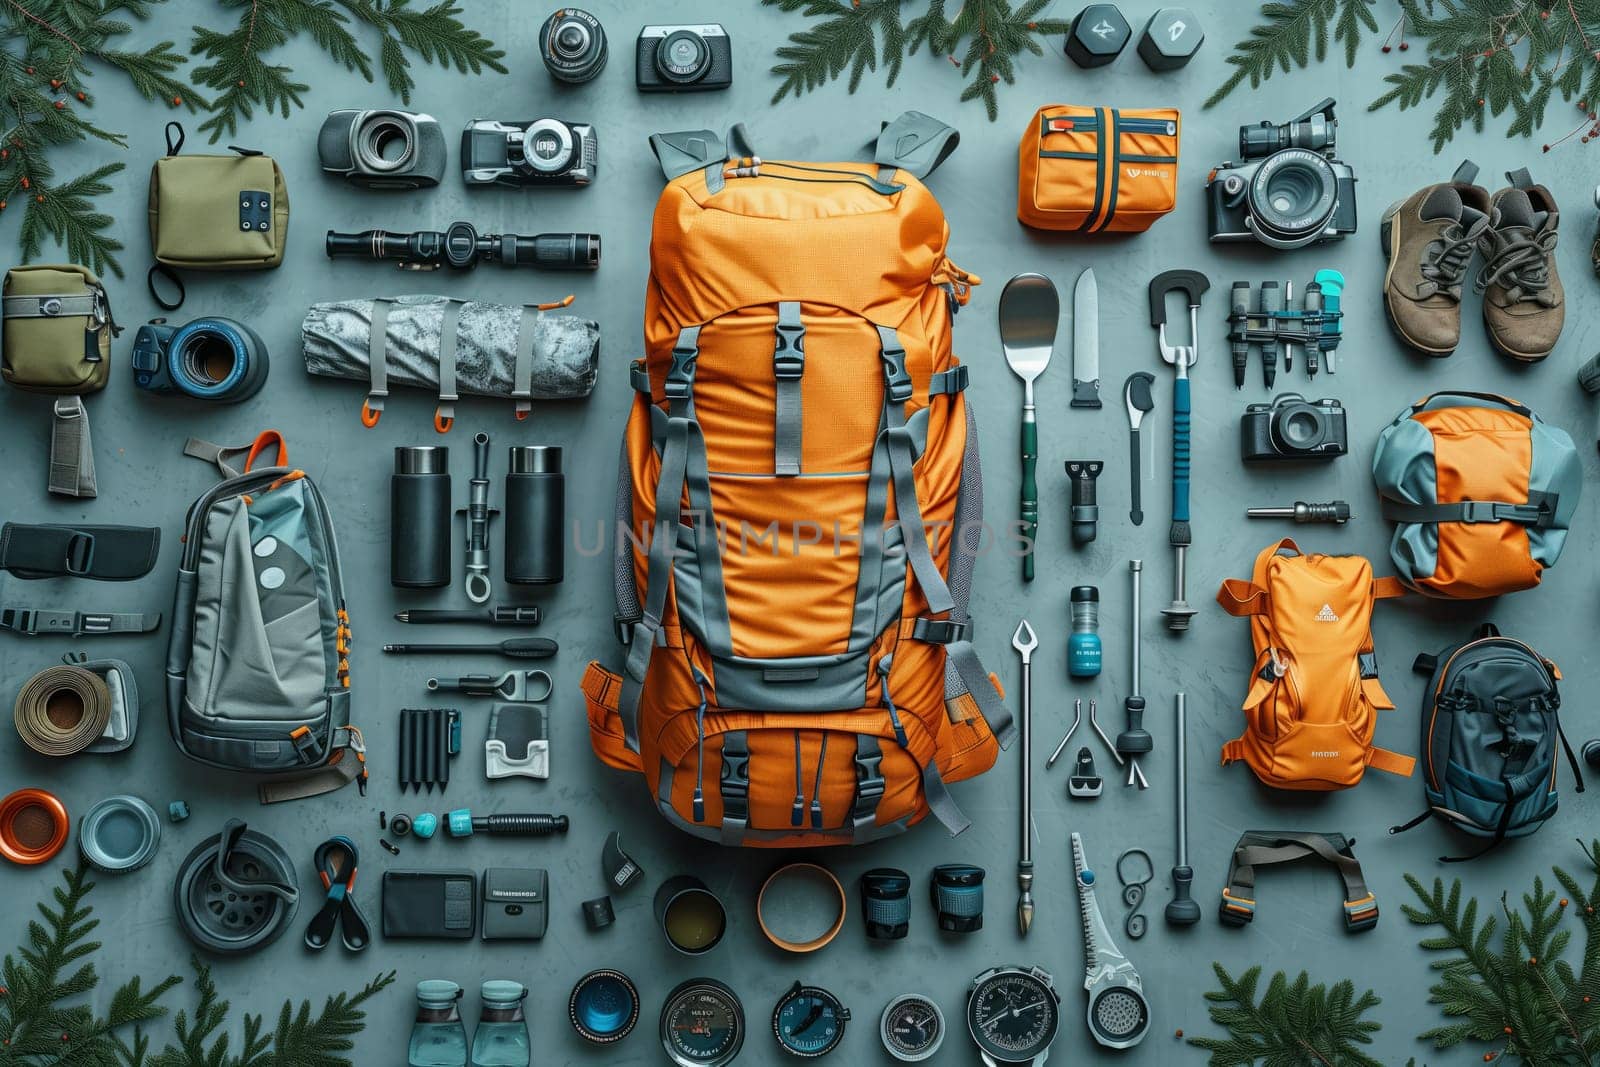 The backpack is surrounded by a plethora of camping equipment, including an organismthemed font art pattern, service for automotive tires, historical rock carvings, and metal tools